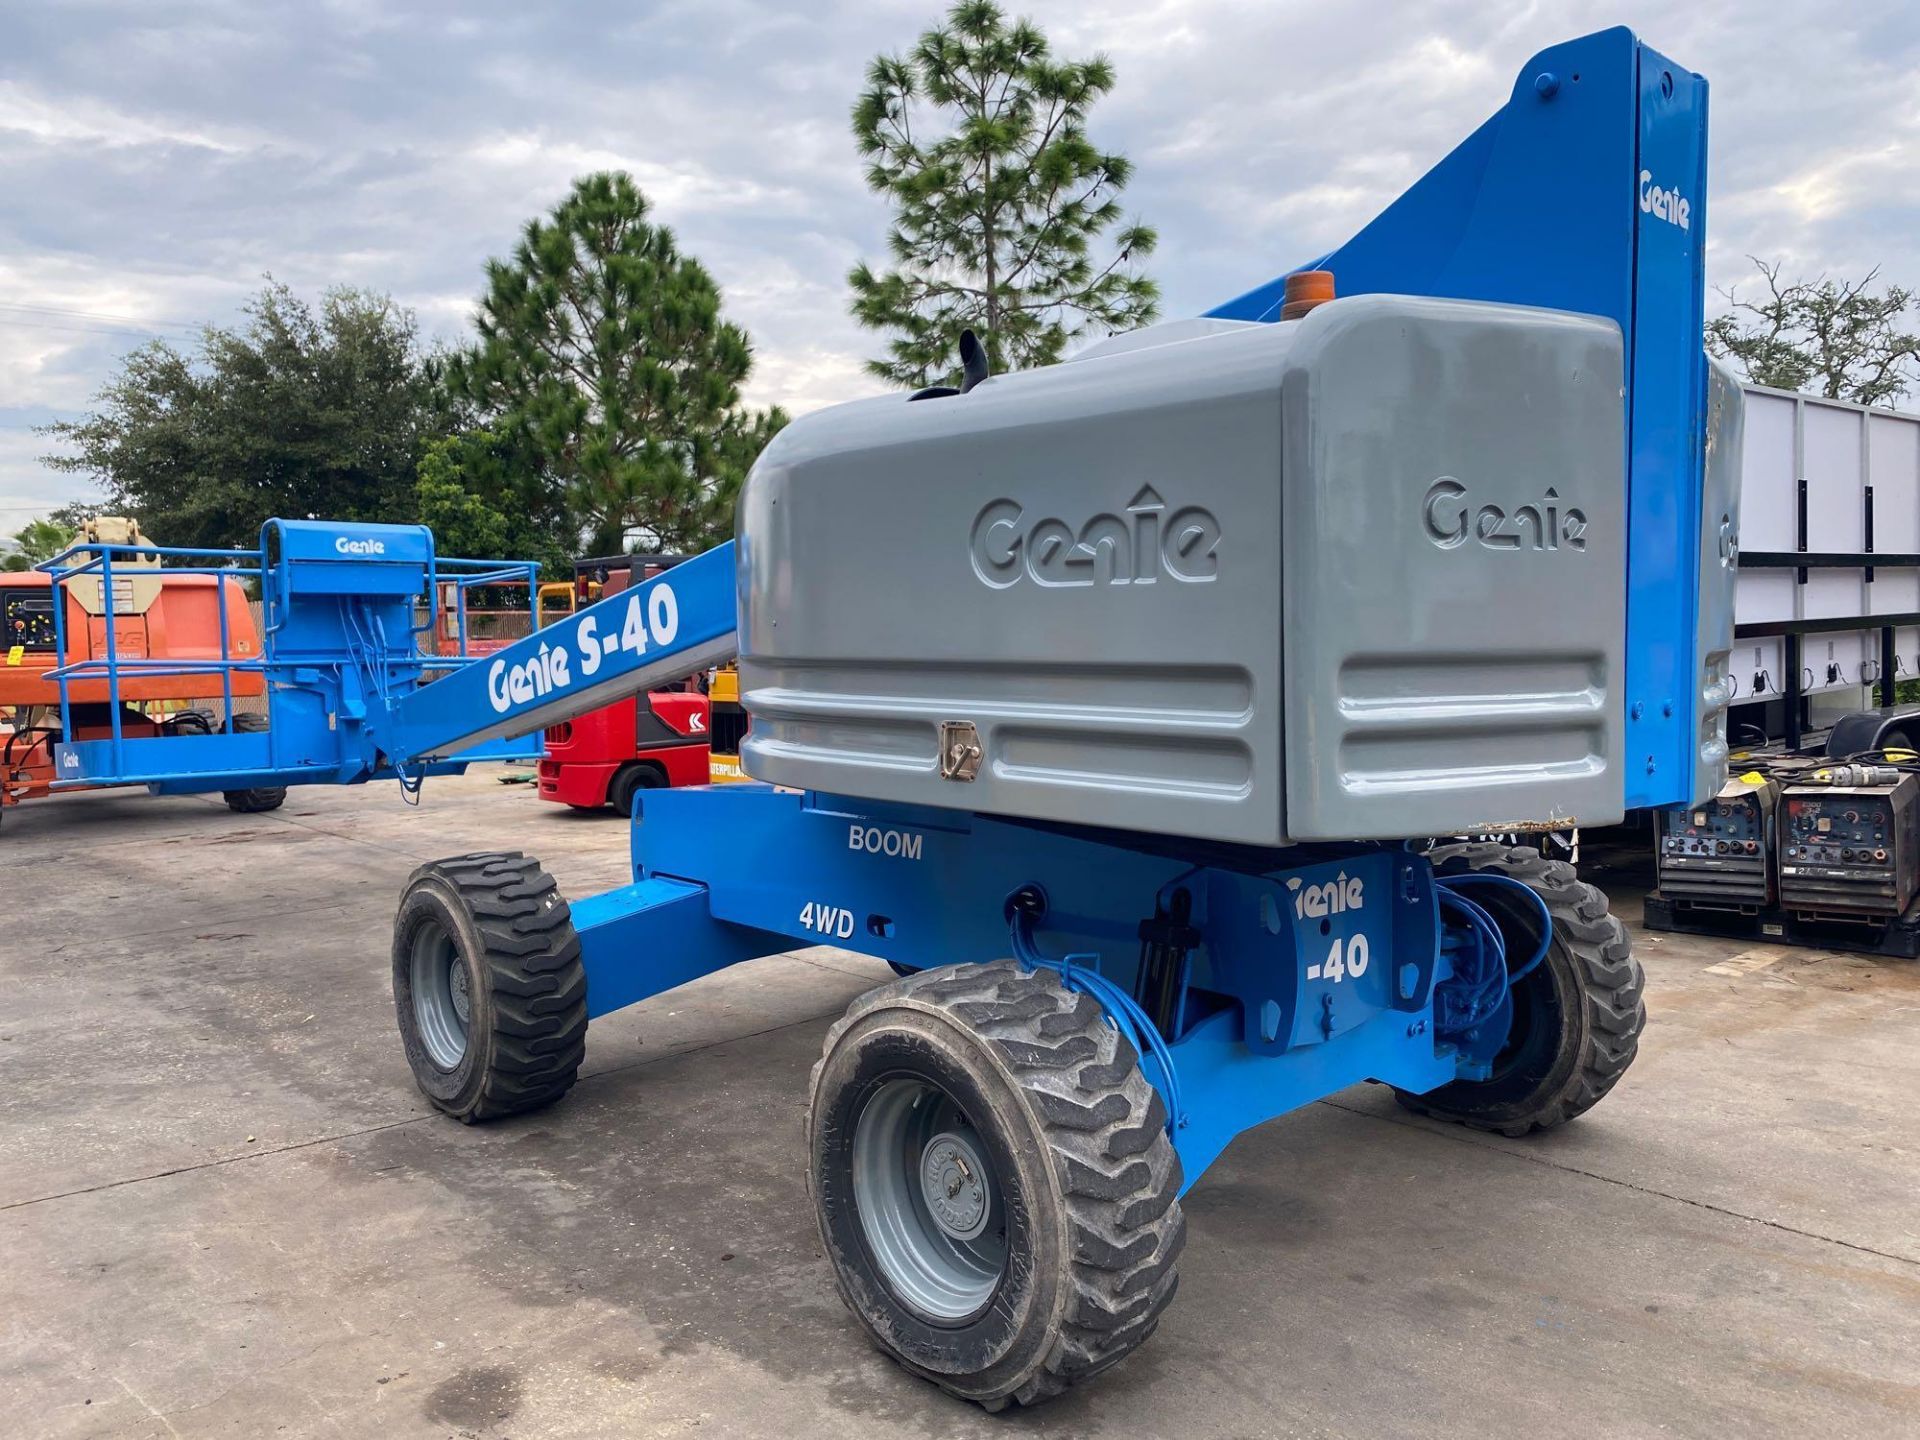 GENIE S-40 DIESEL BOOM LIFT, 4x4, 40' PLATFORM HEIGHT, RUNS AND OPERATES - Image 4 of 11